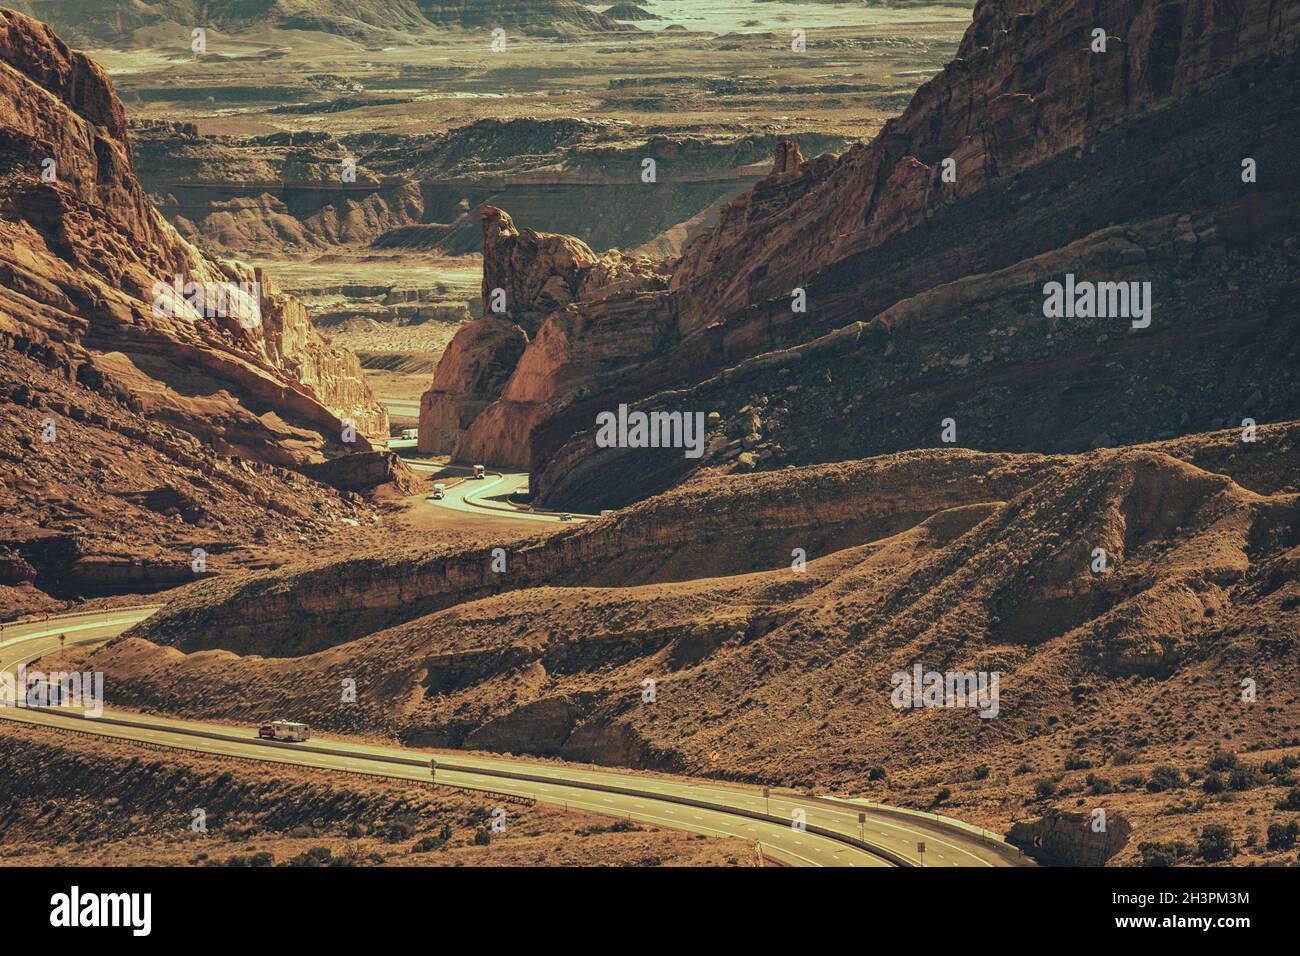 Scenic Utah Interstate 70 Highway. Sandstone Rock Formations Scenery and the Road Crossing the Raw Landscape. Stock Photo